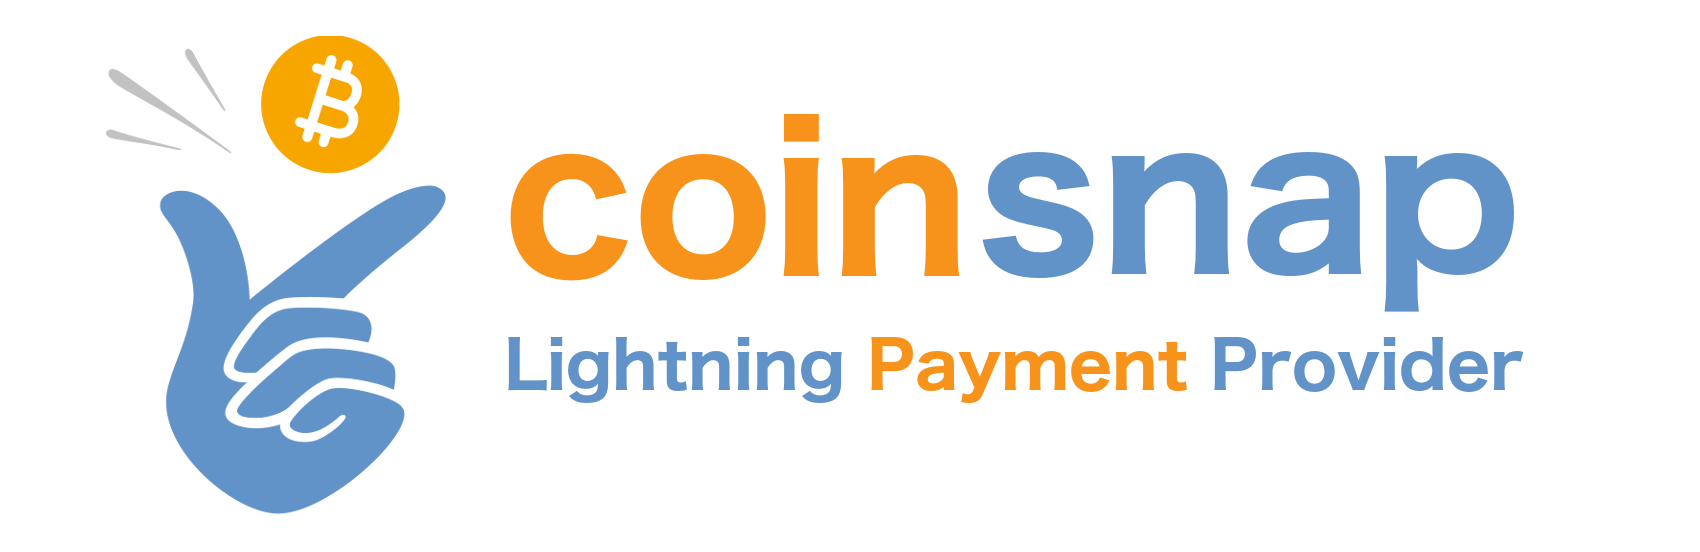 Coinsnap - Lightning Payment Solution